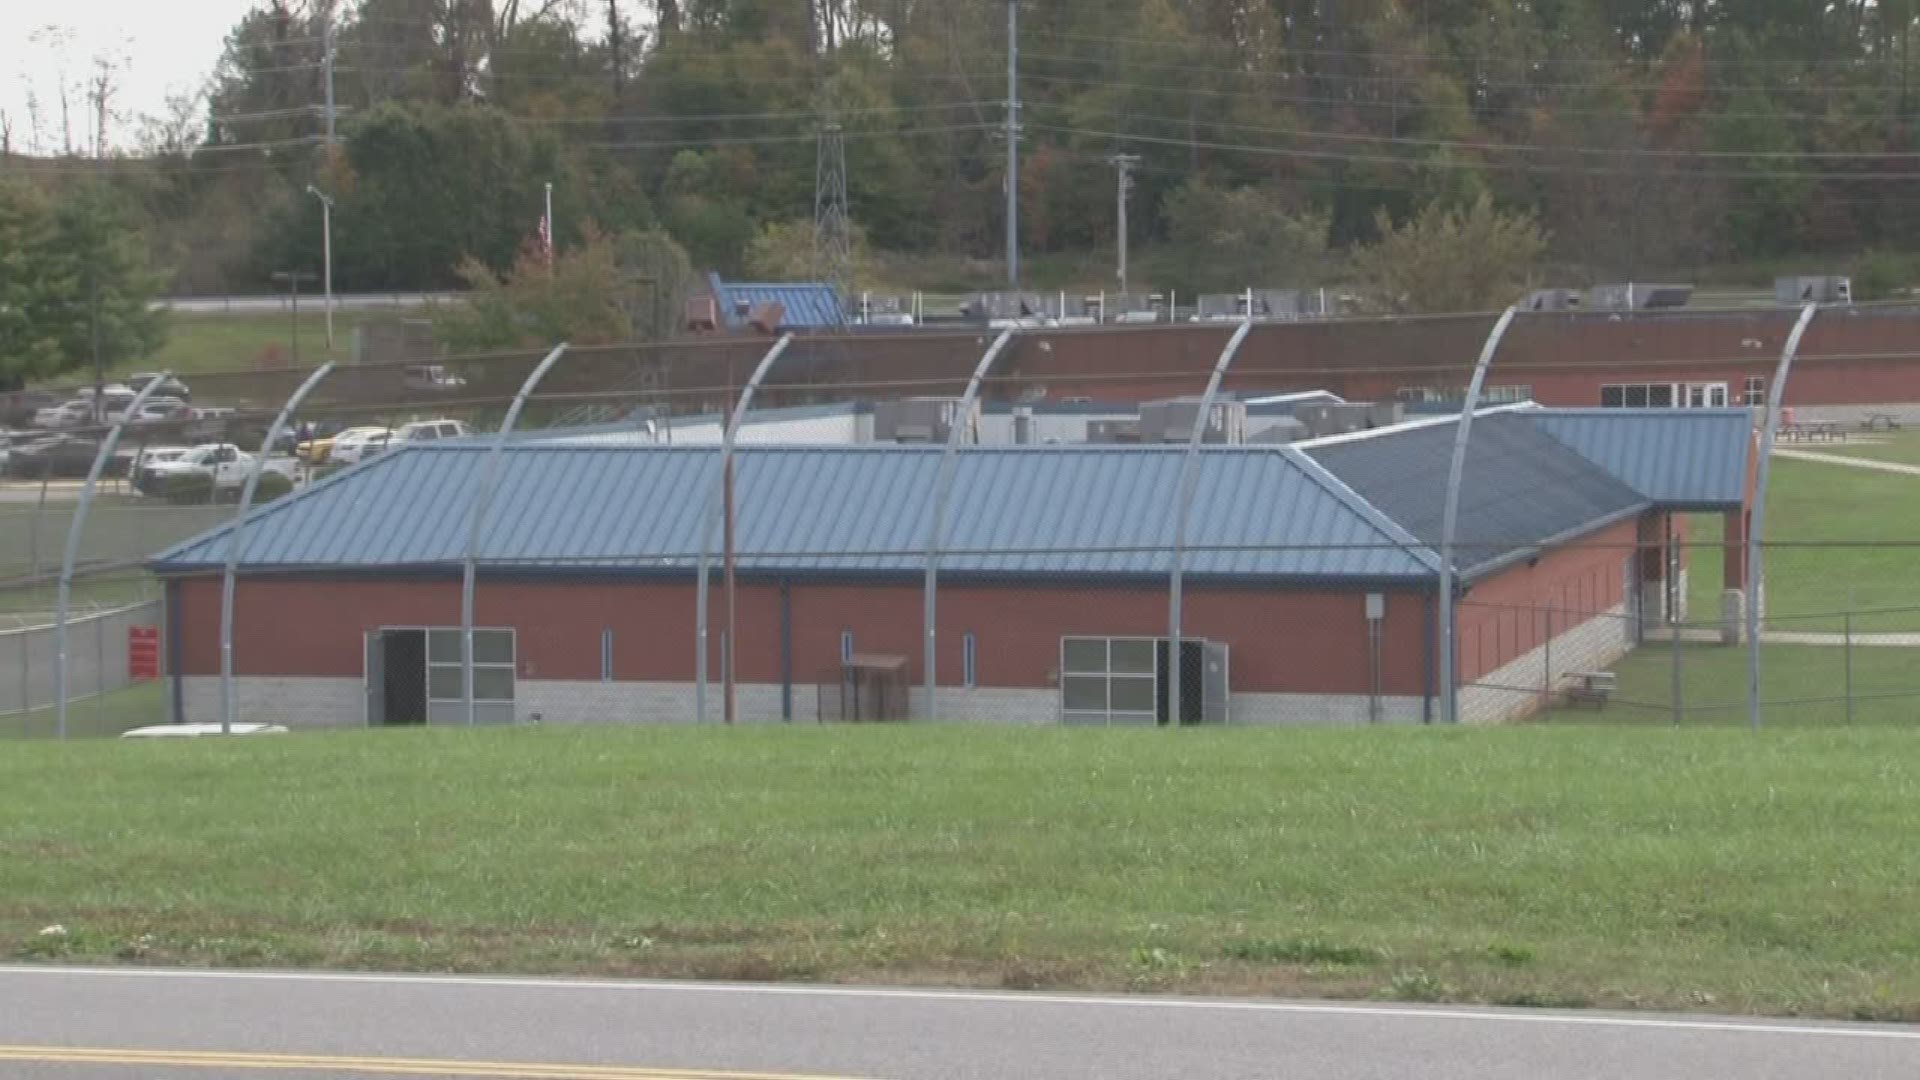 Dandridge Police were called out three times over three days to handle unruly teen inmates at the Mountain View Academy for Young Men in Jefferson County.